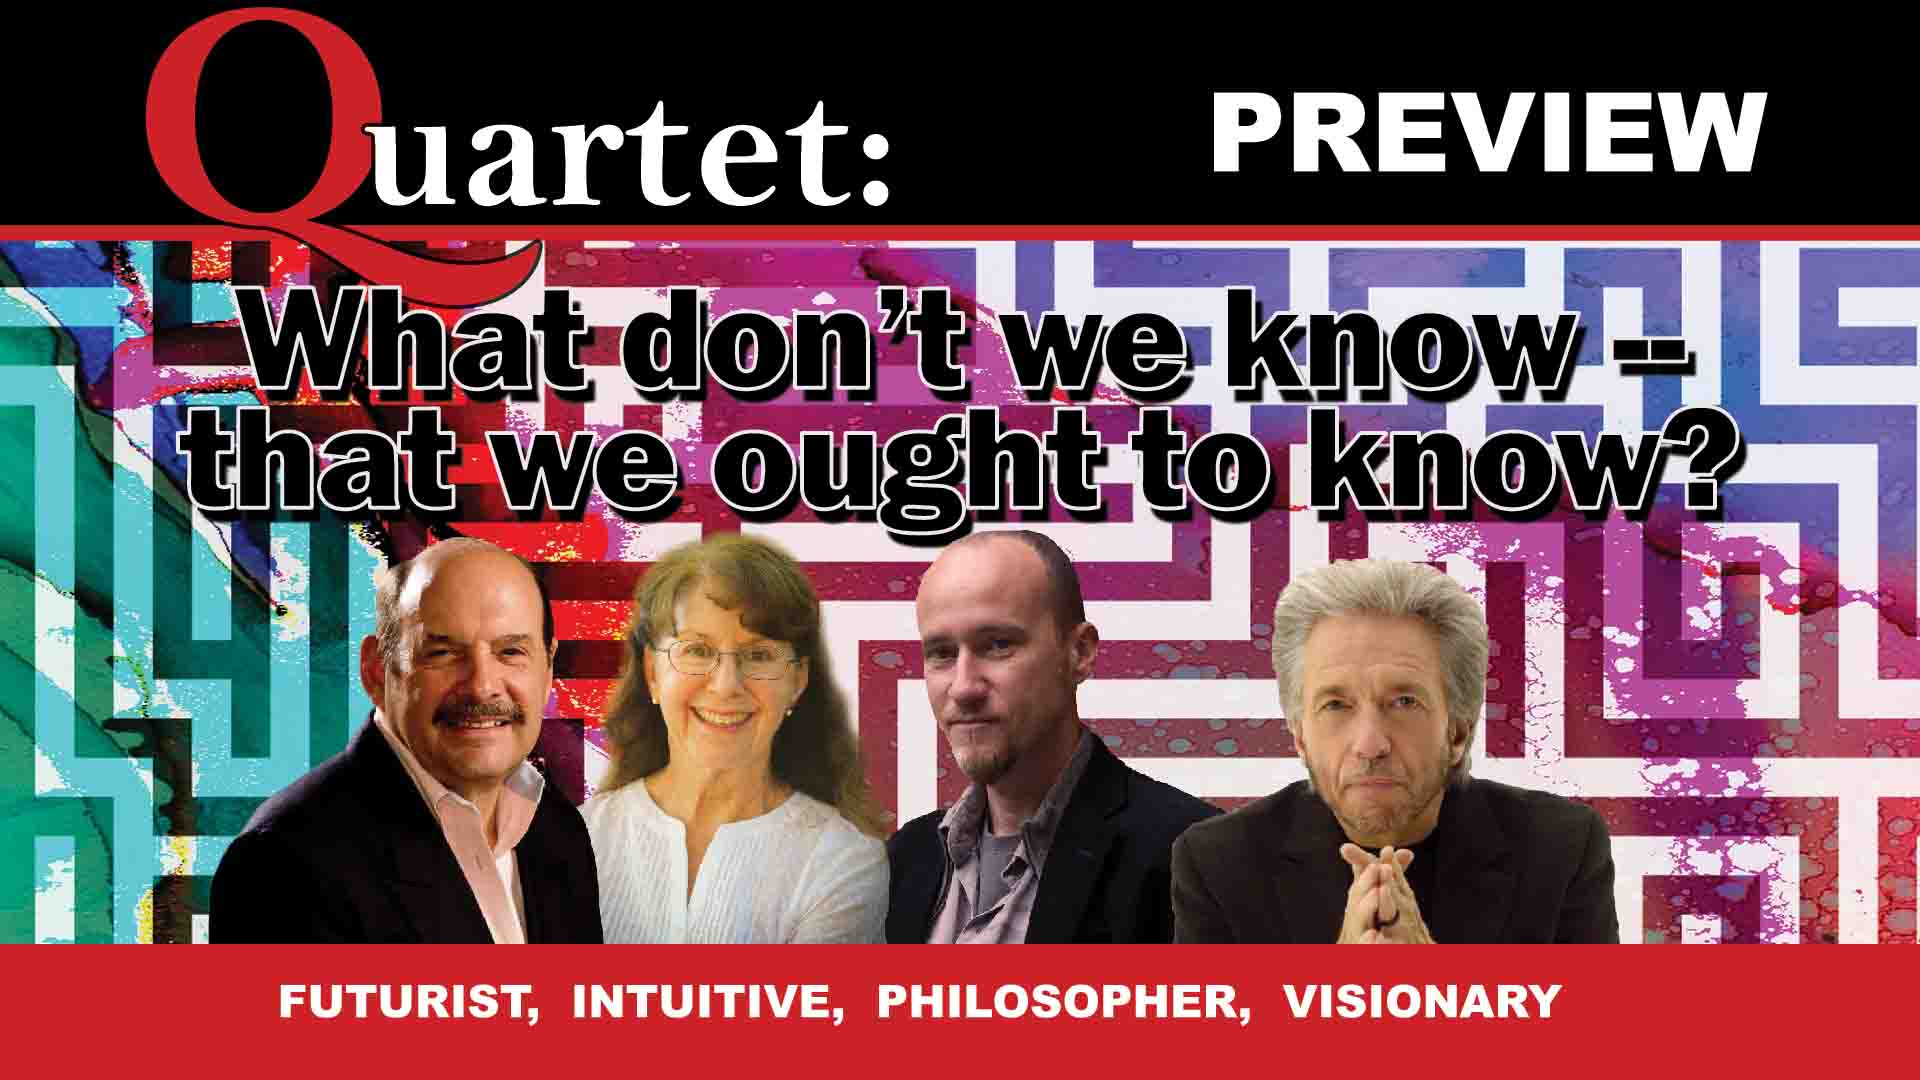 Quartet preview, What don't we know that we ought to know?